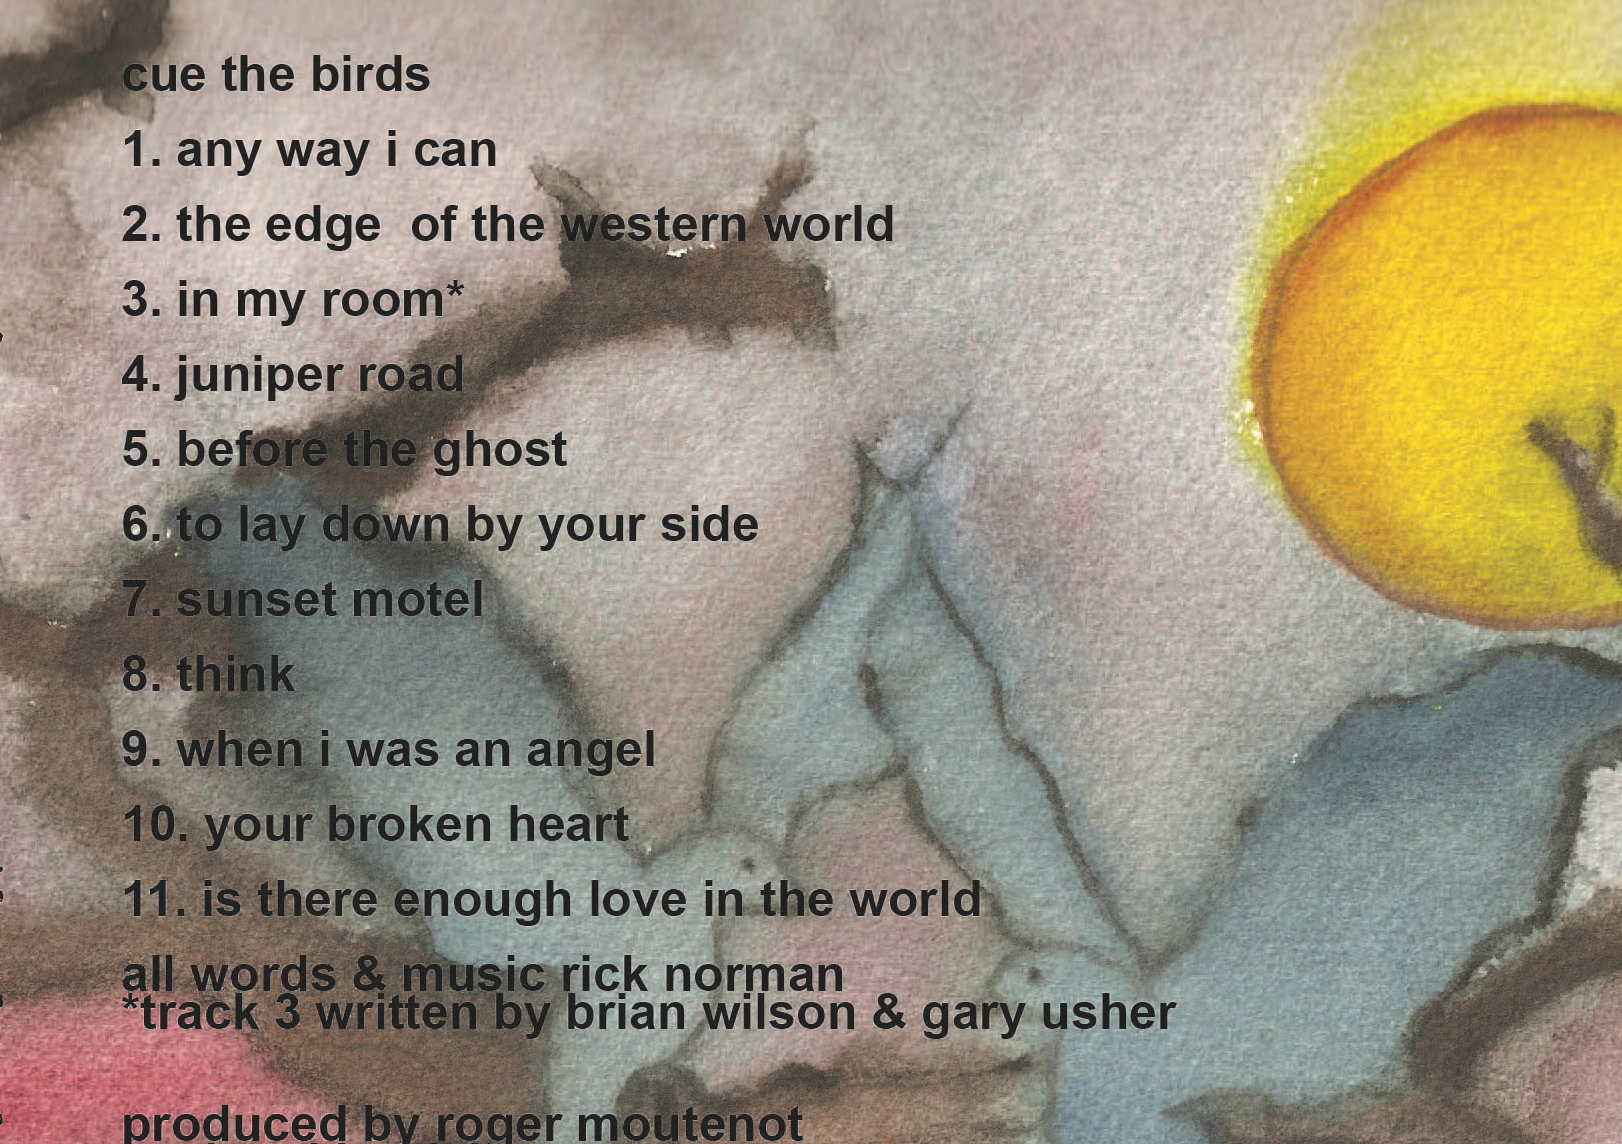 Cue the Birds - song list (back cover)